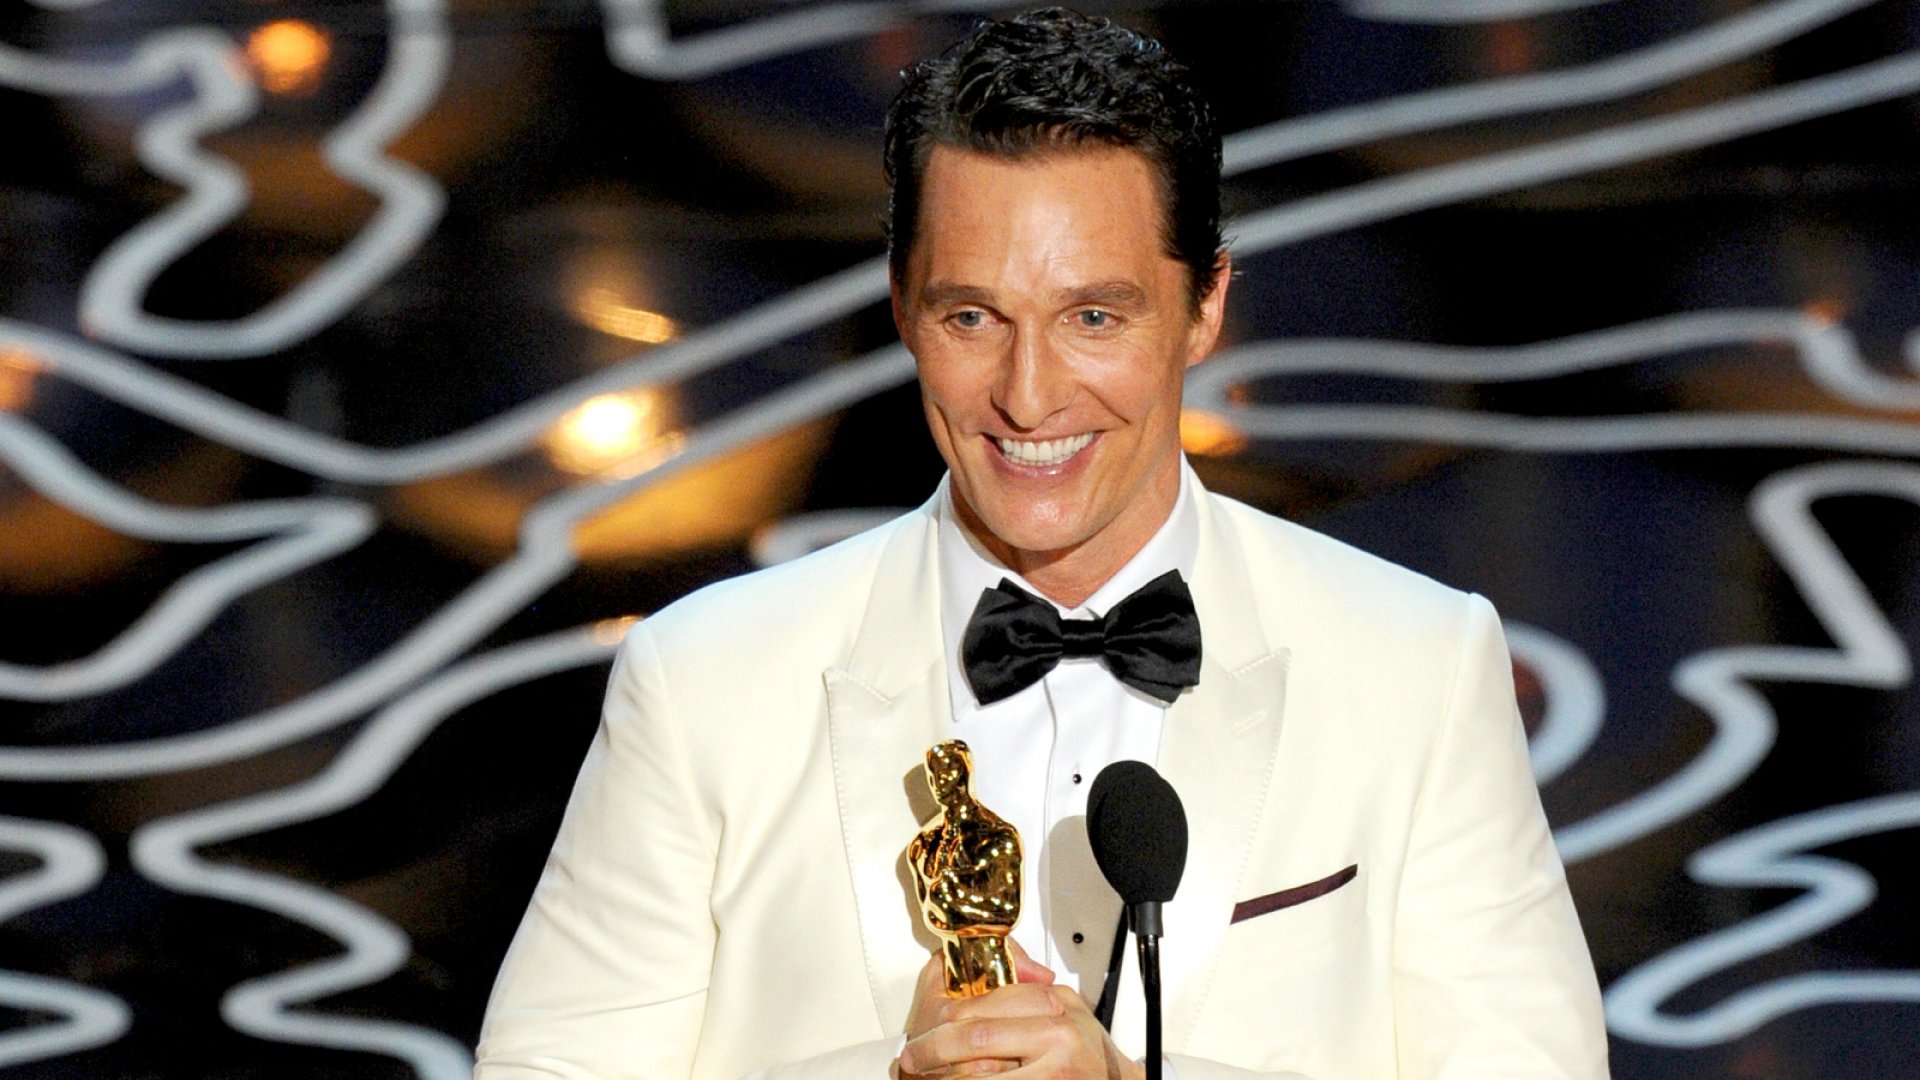 Matthew McConaughey Most Grossing Movie Could Surprise You!